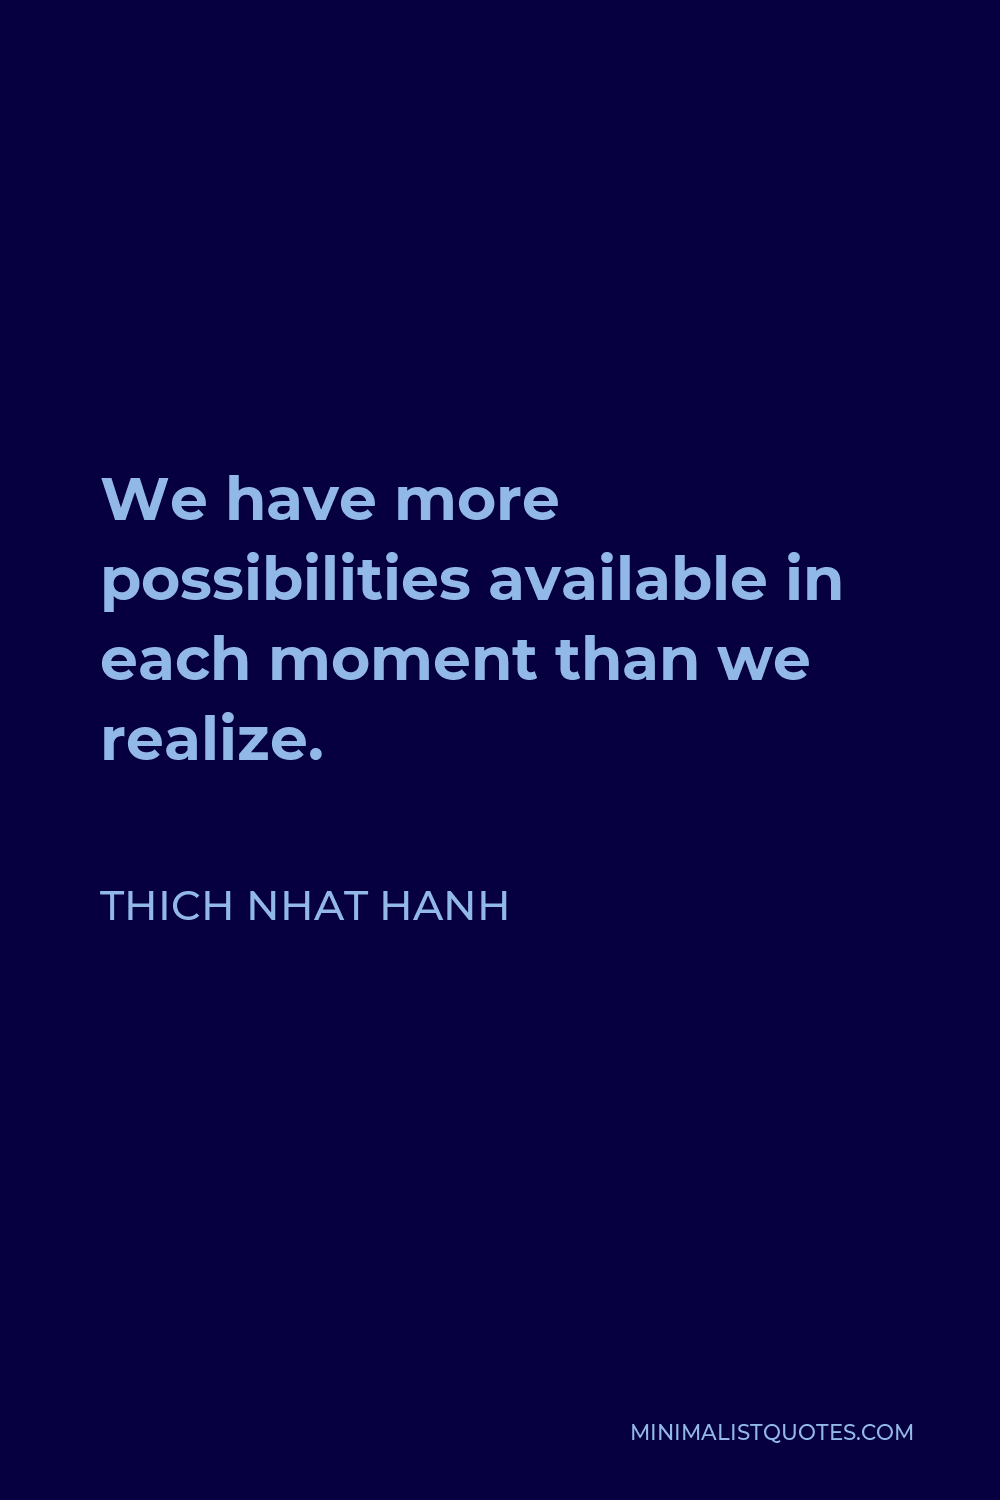 Thich Nhat Hanh Quote - We have more possibilities available in each moment than we realize.